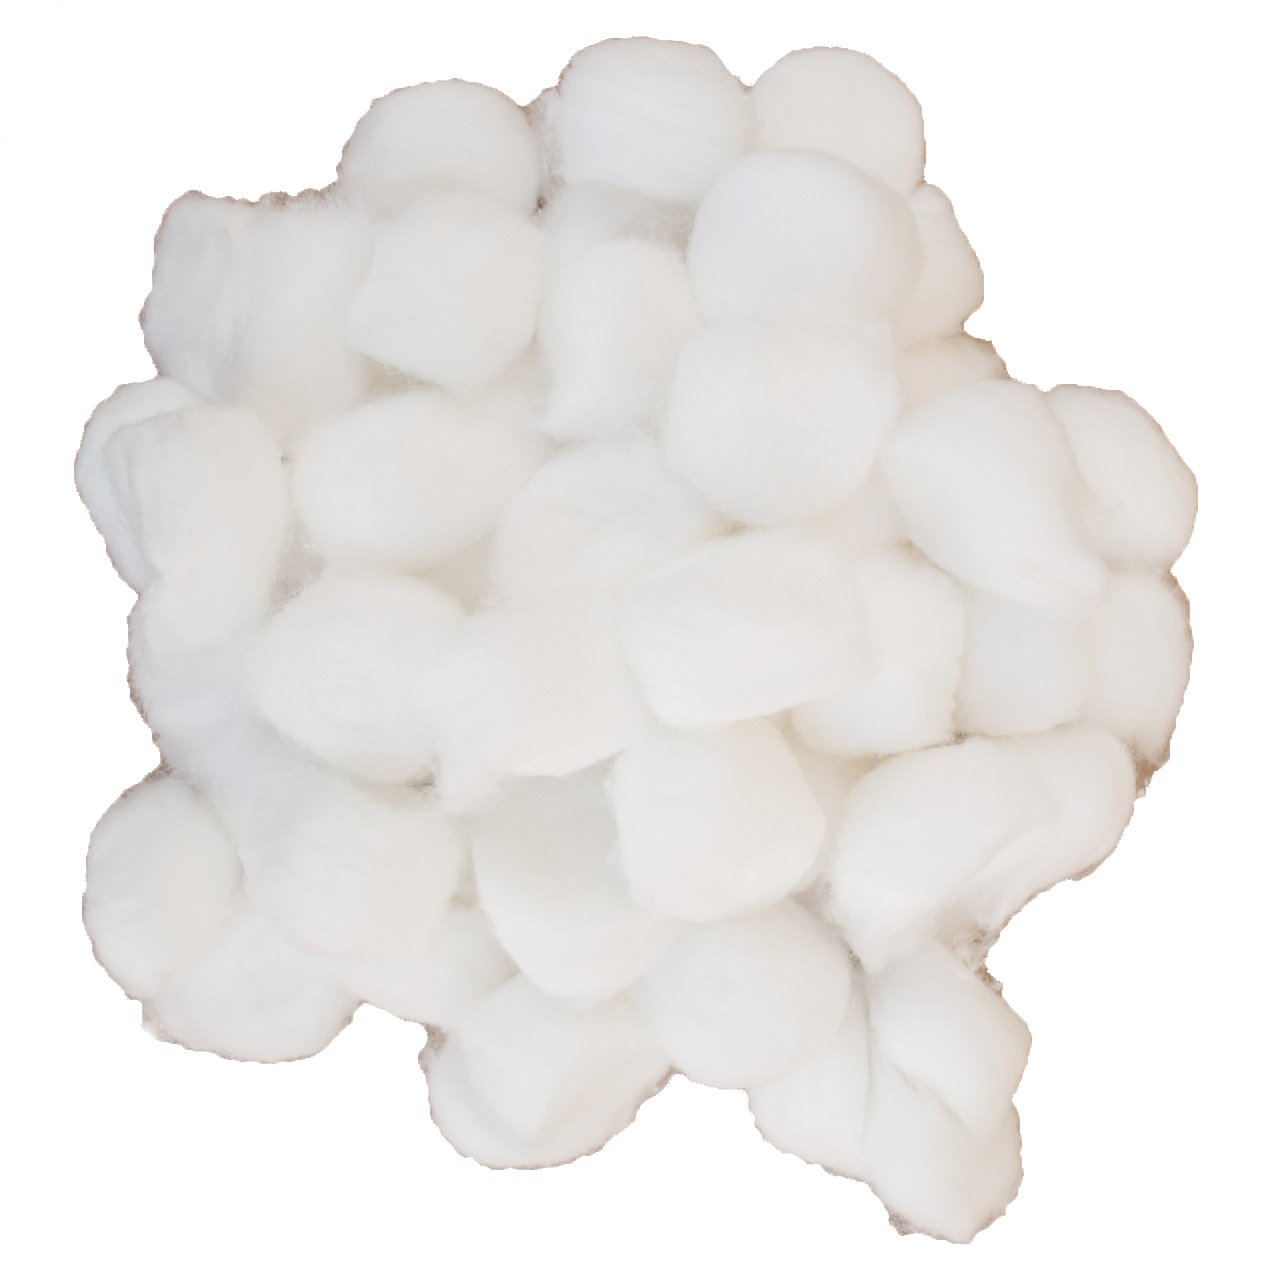 Cotton ball large, fits narrow vial (2000)